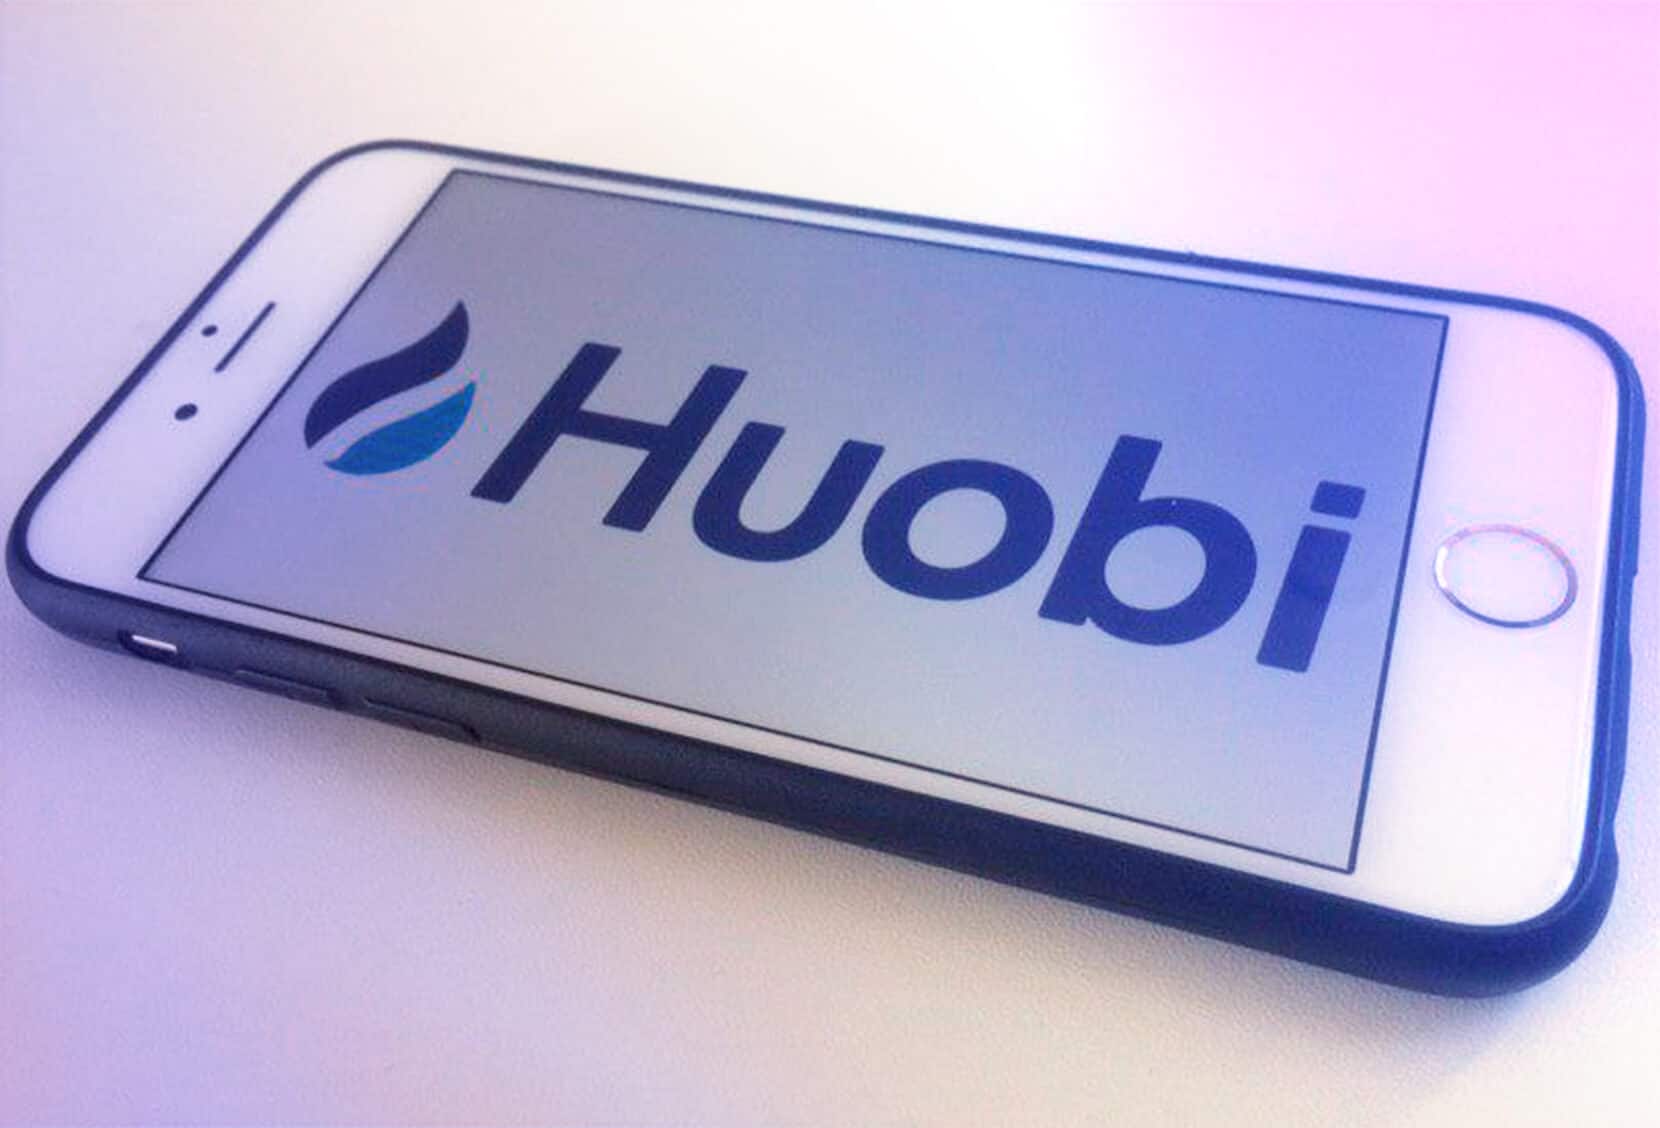 Huobi Joins Chinese Blockchain Alliance with China Telecom and Others